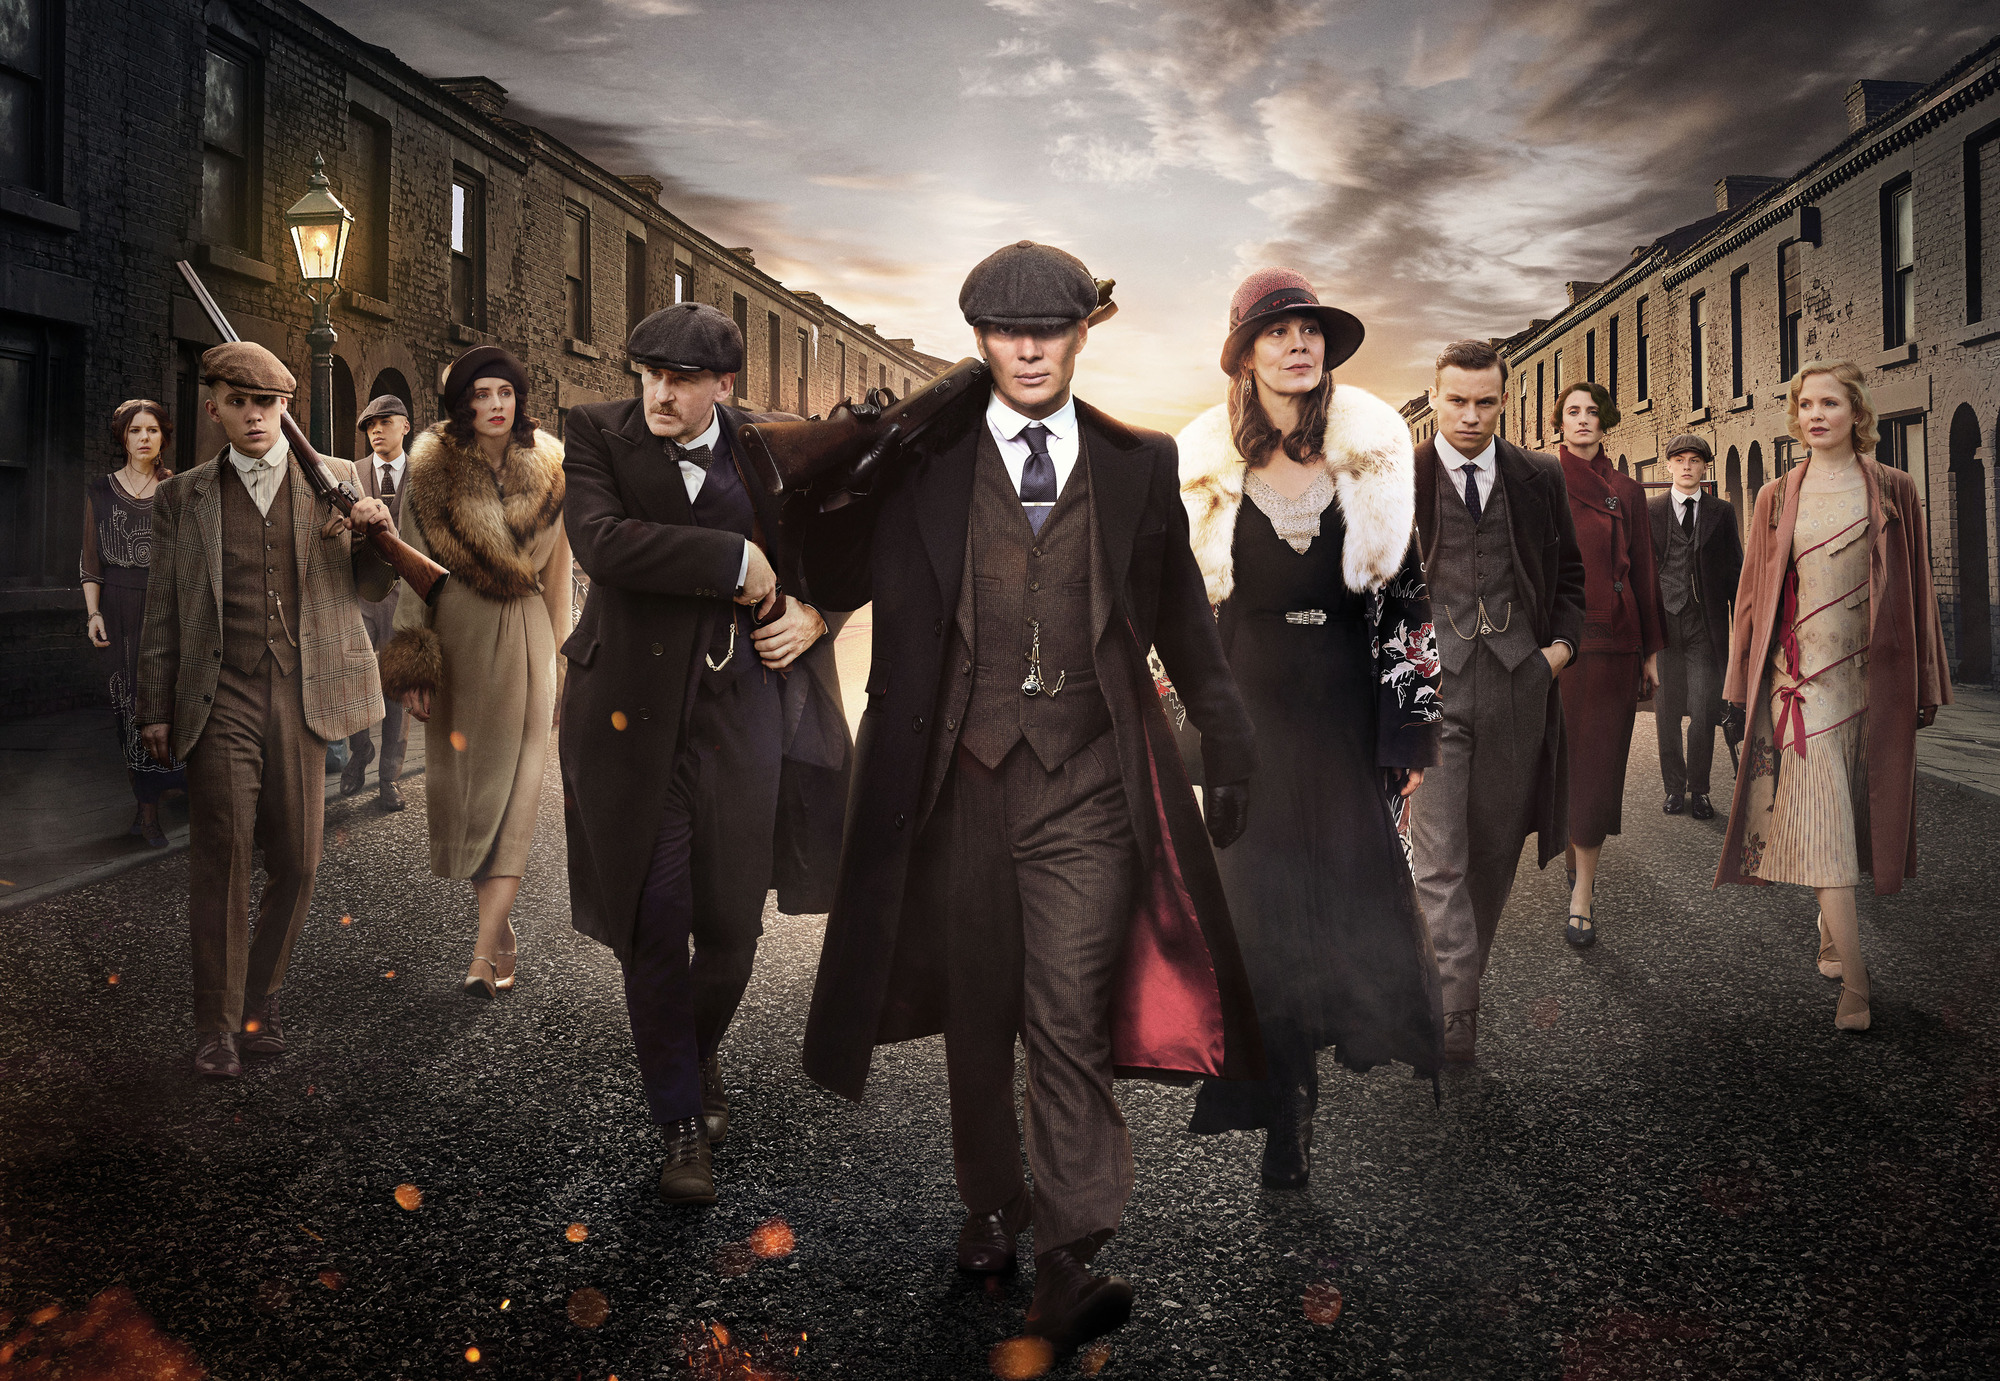 Peaky Blinders Grace Shelby Races Day Women's Costume